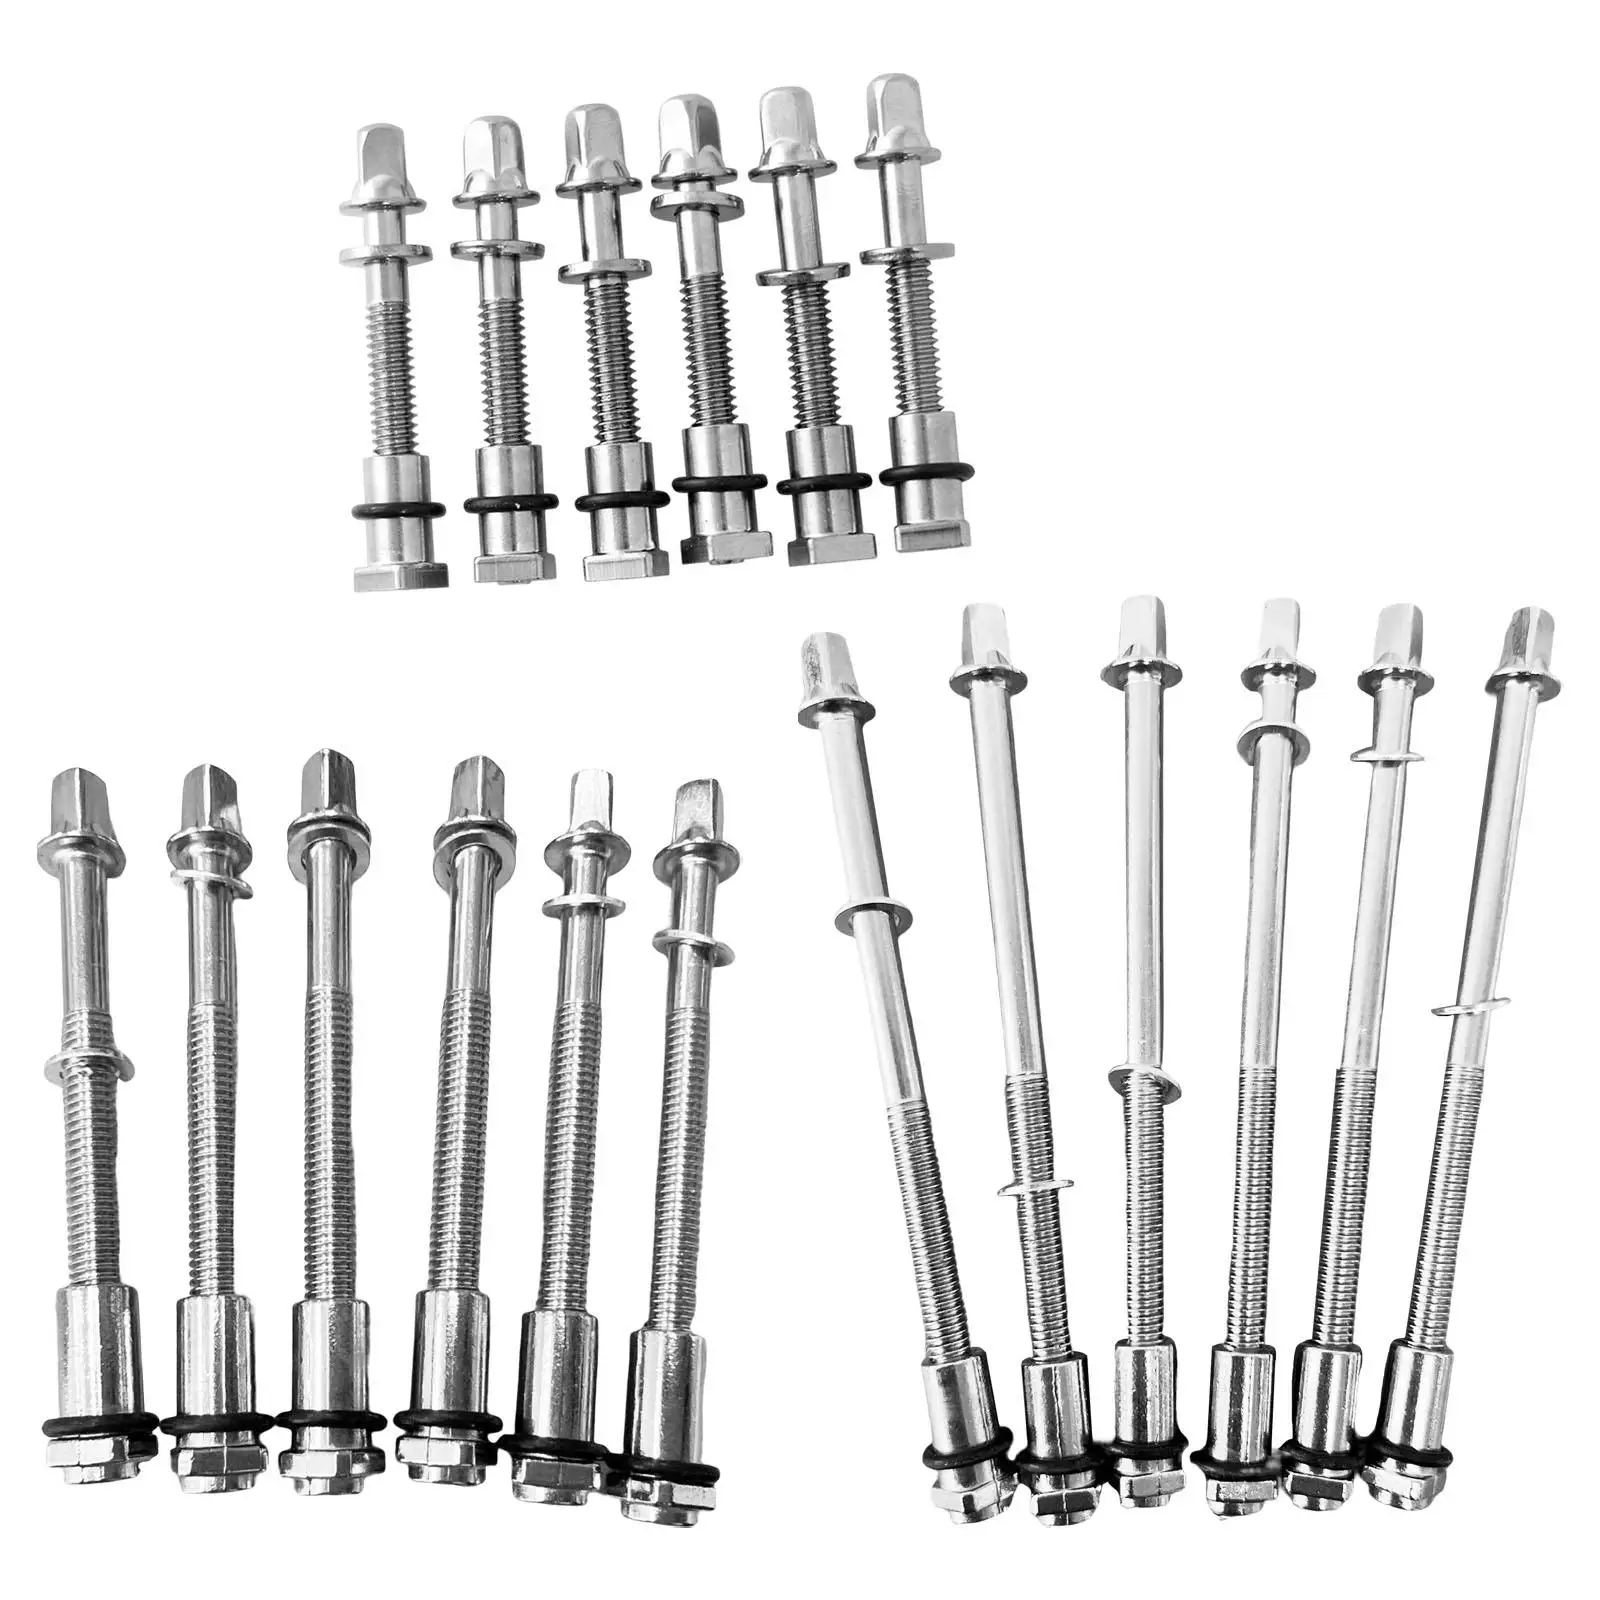 6x Drum Tension Rods with Washer Universal Stainless Steel Hardware 6mm for